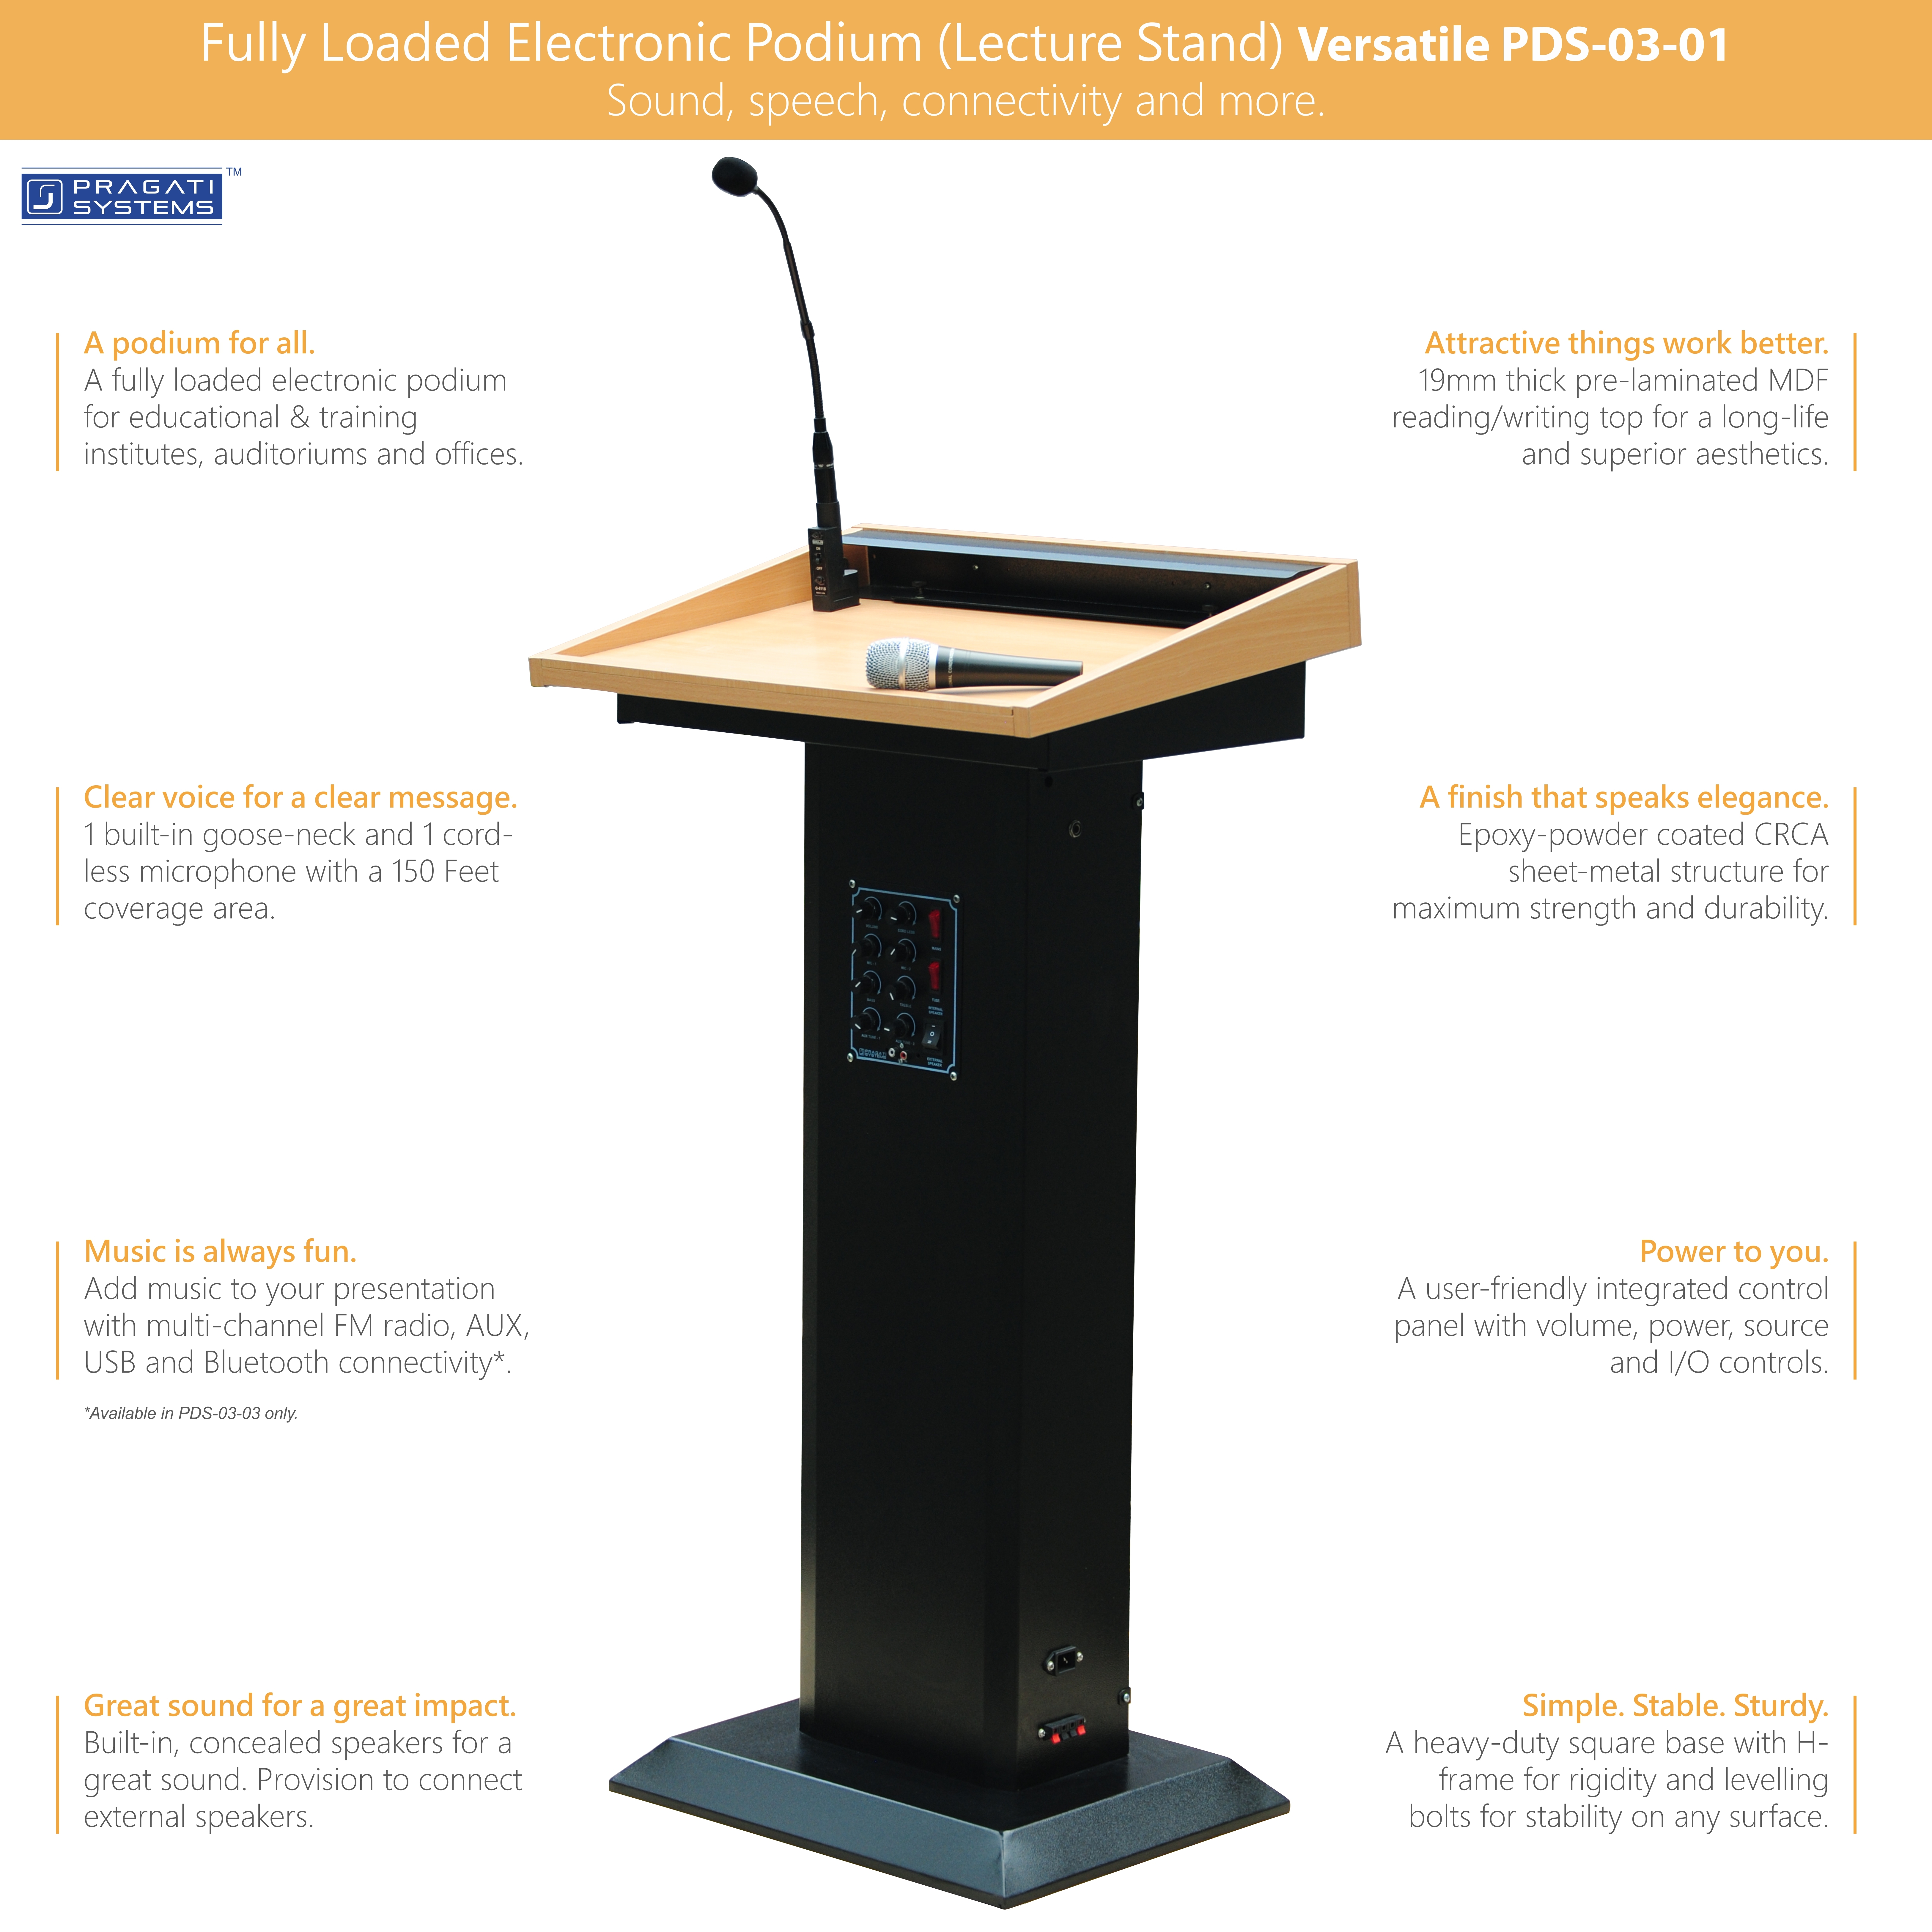 Fully Loaded Electronic Podium (Lecture Stand)